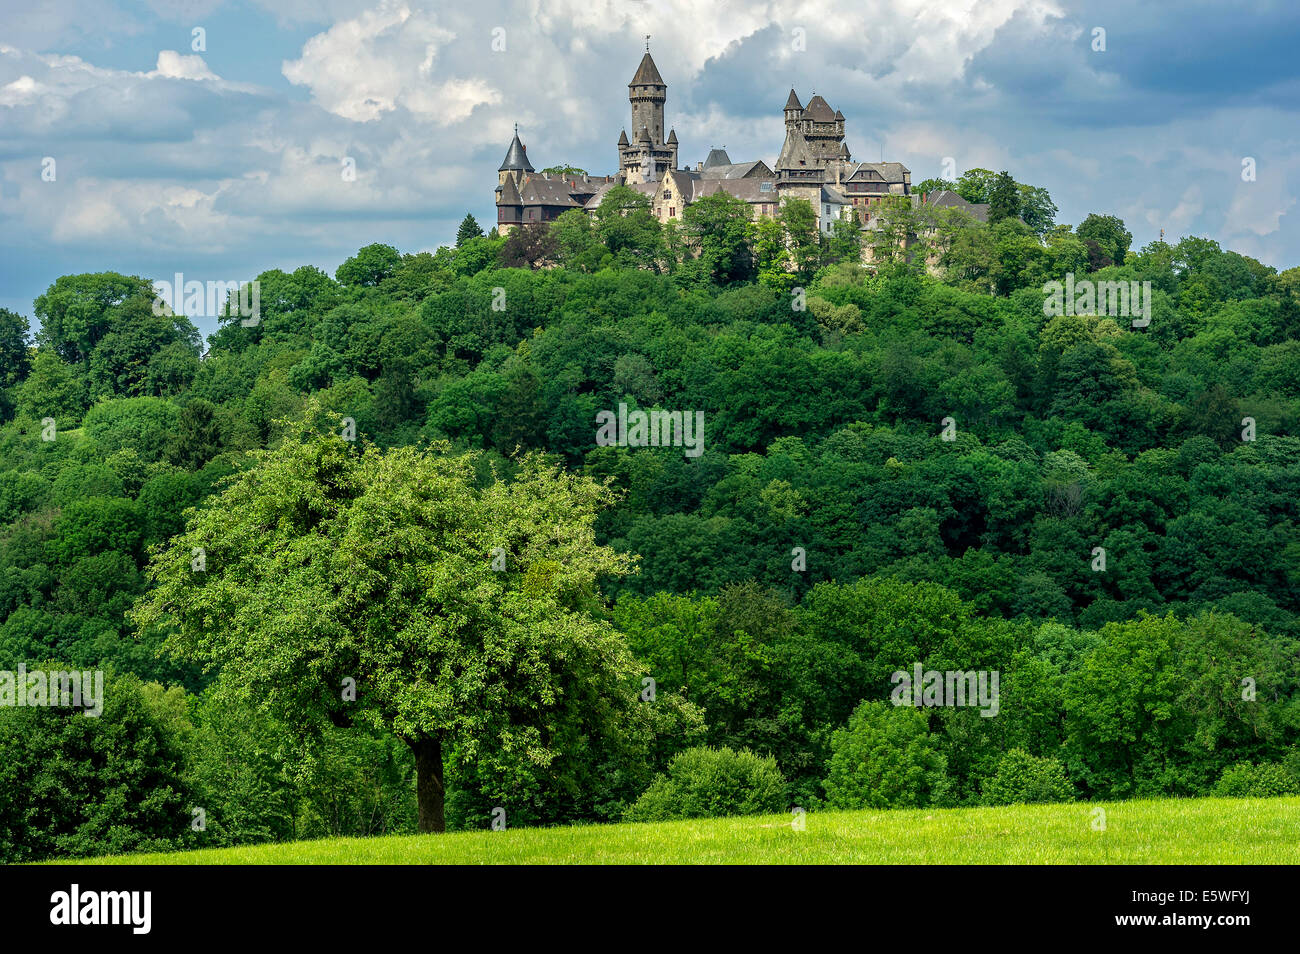 Castle towers, Hubertus Tower, New Castle Keep, Georg Tower and Alter Stock tower, in the overall view of Castle Braunfels Stock Photo